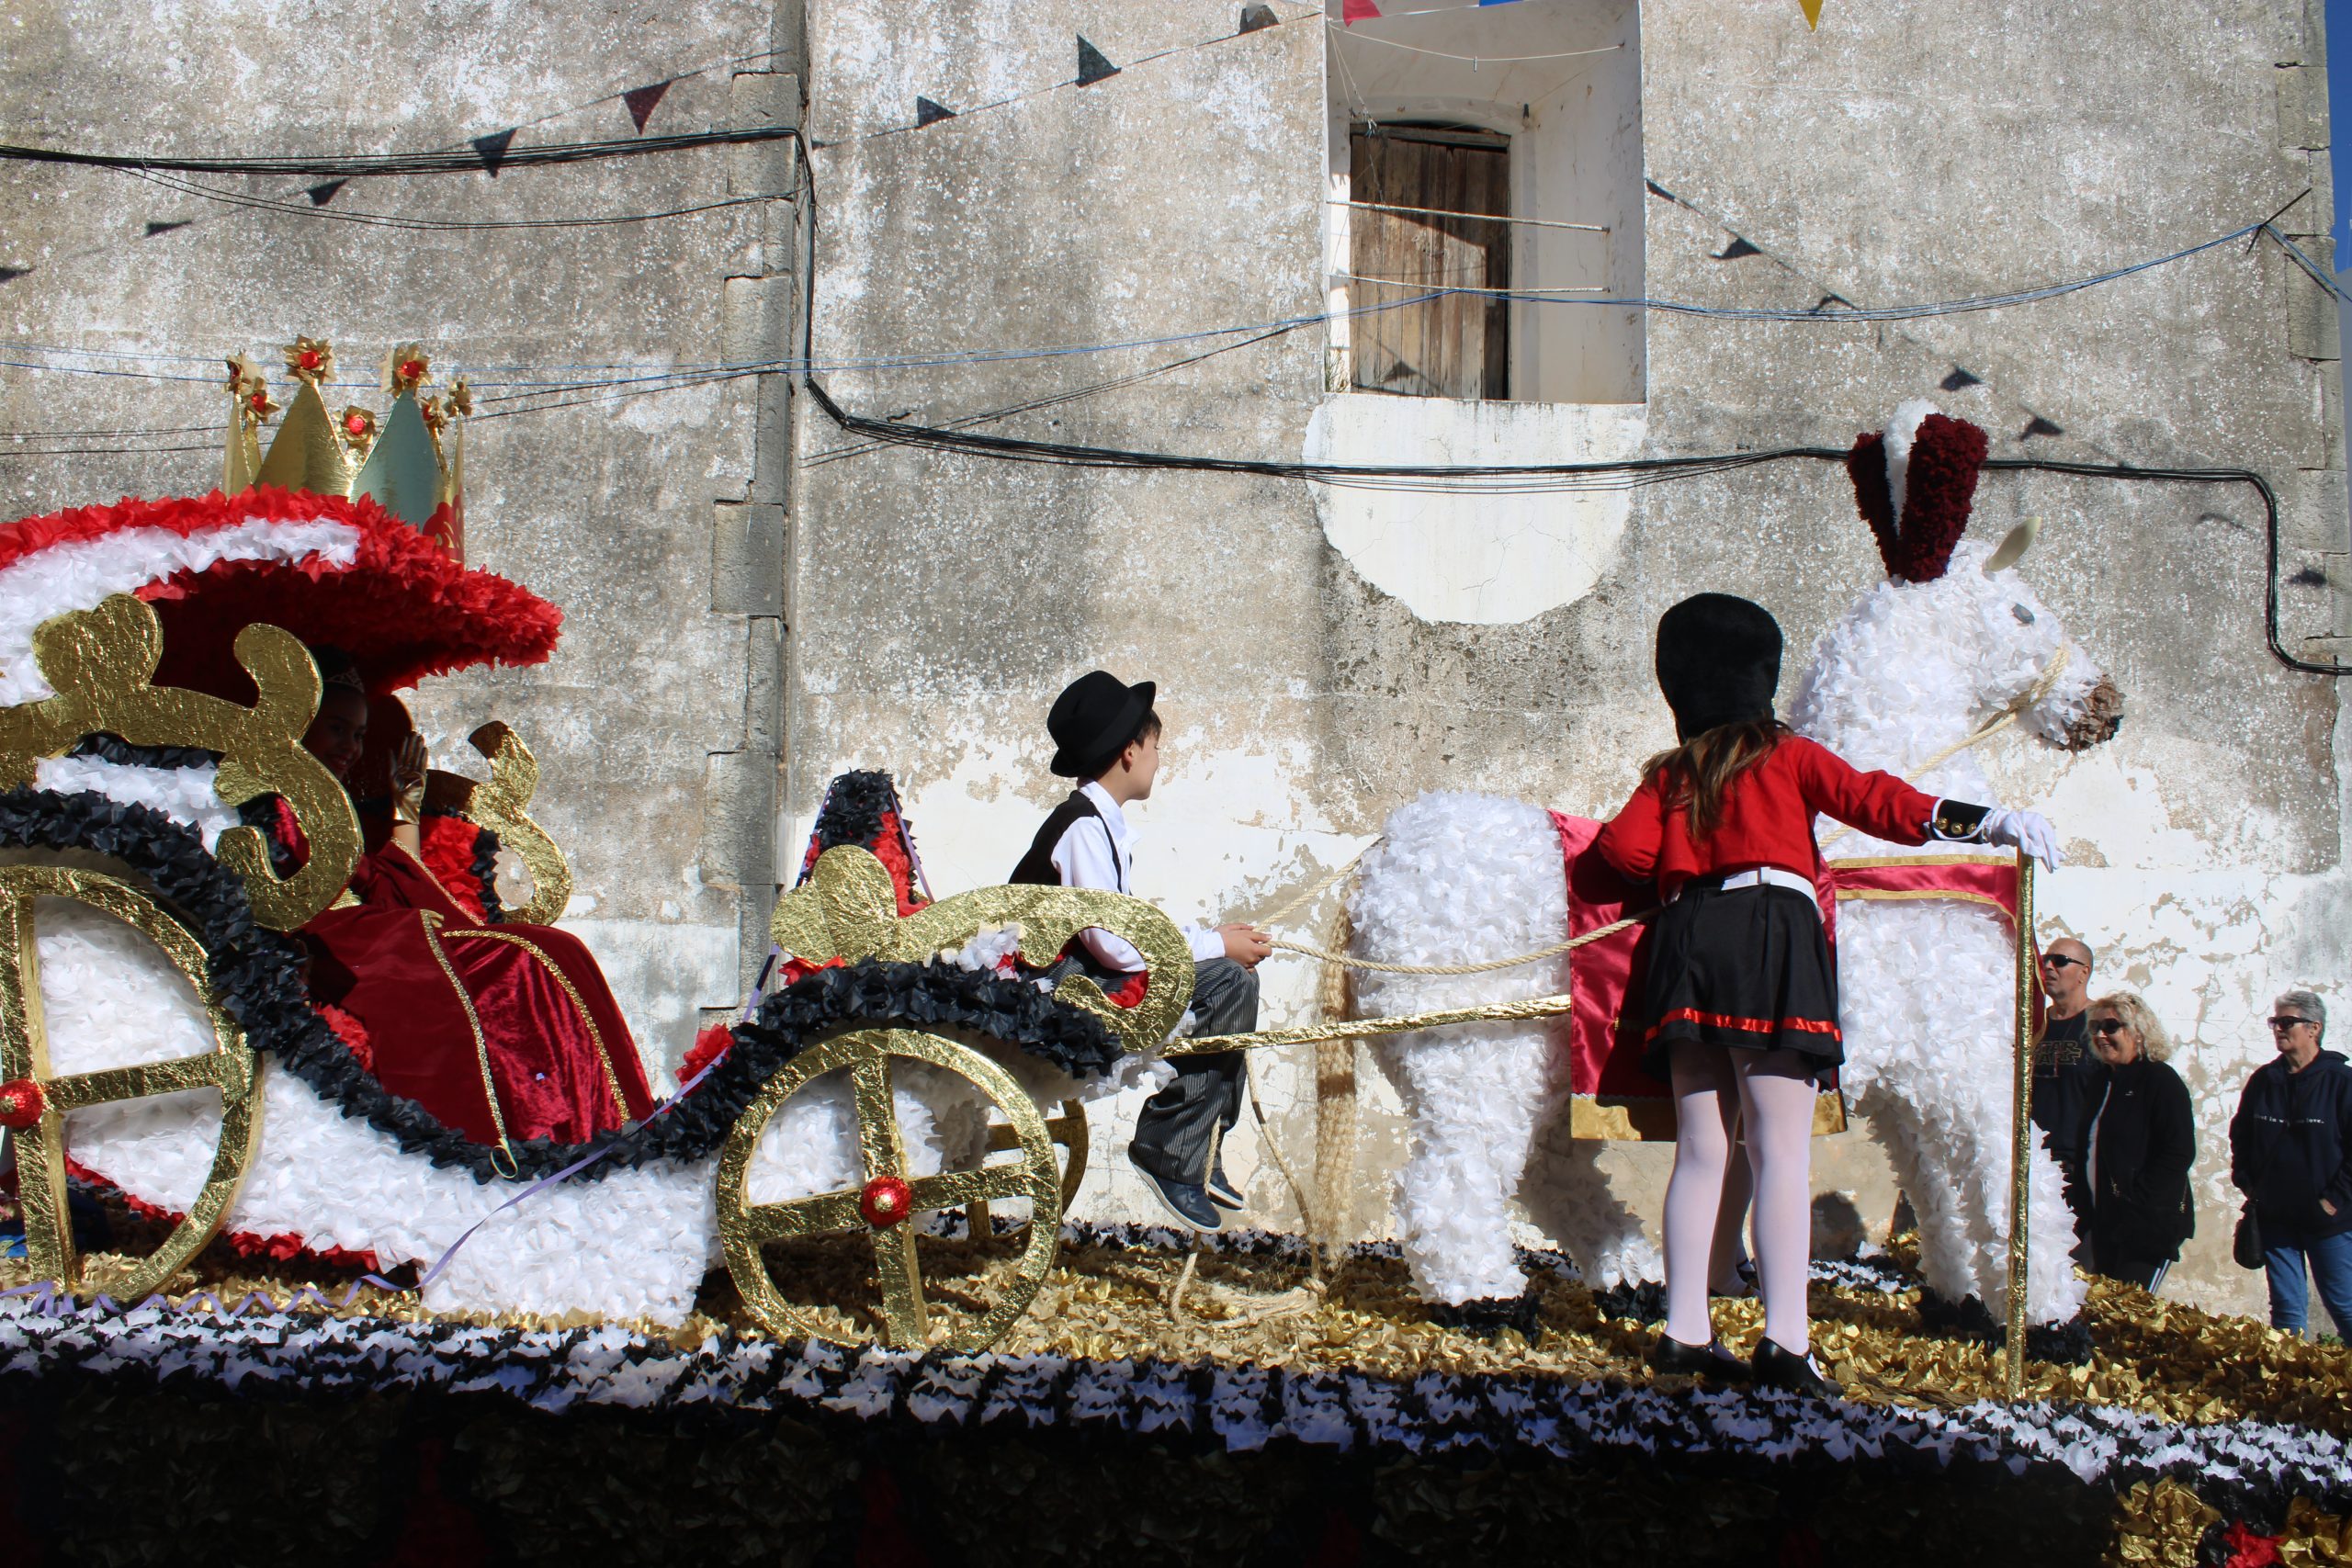 Сarnival on the south of Portugal: Moncarapacho village